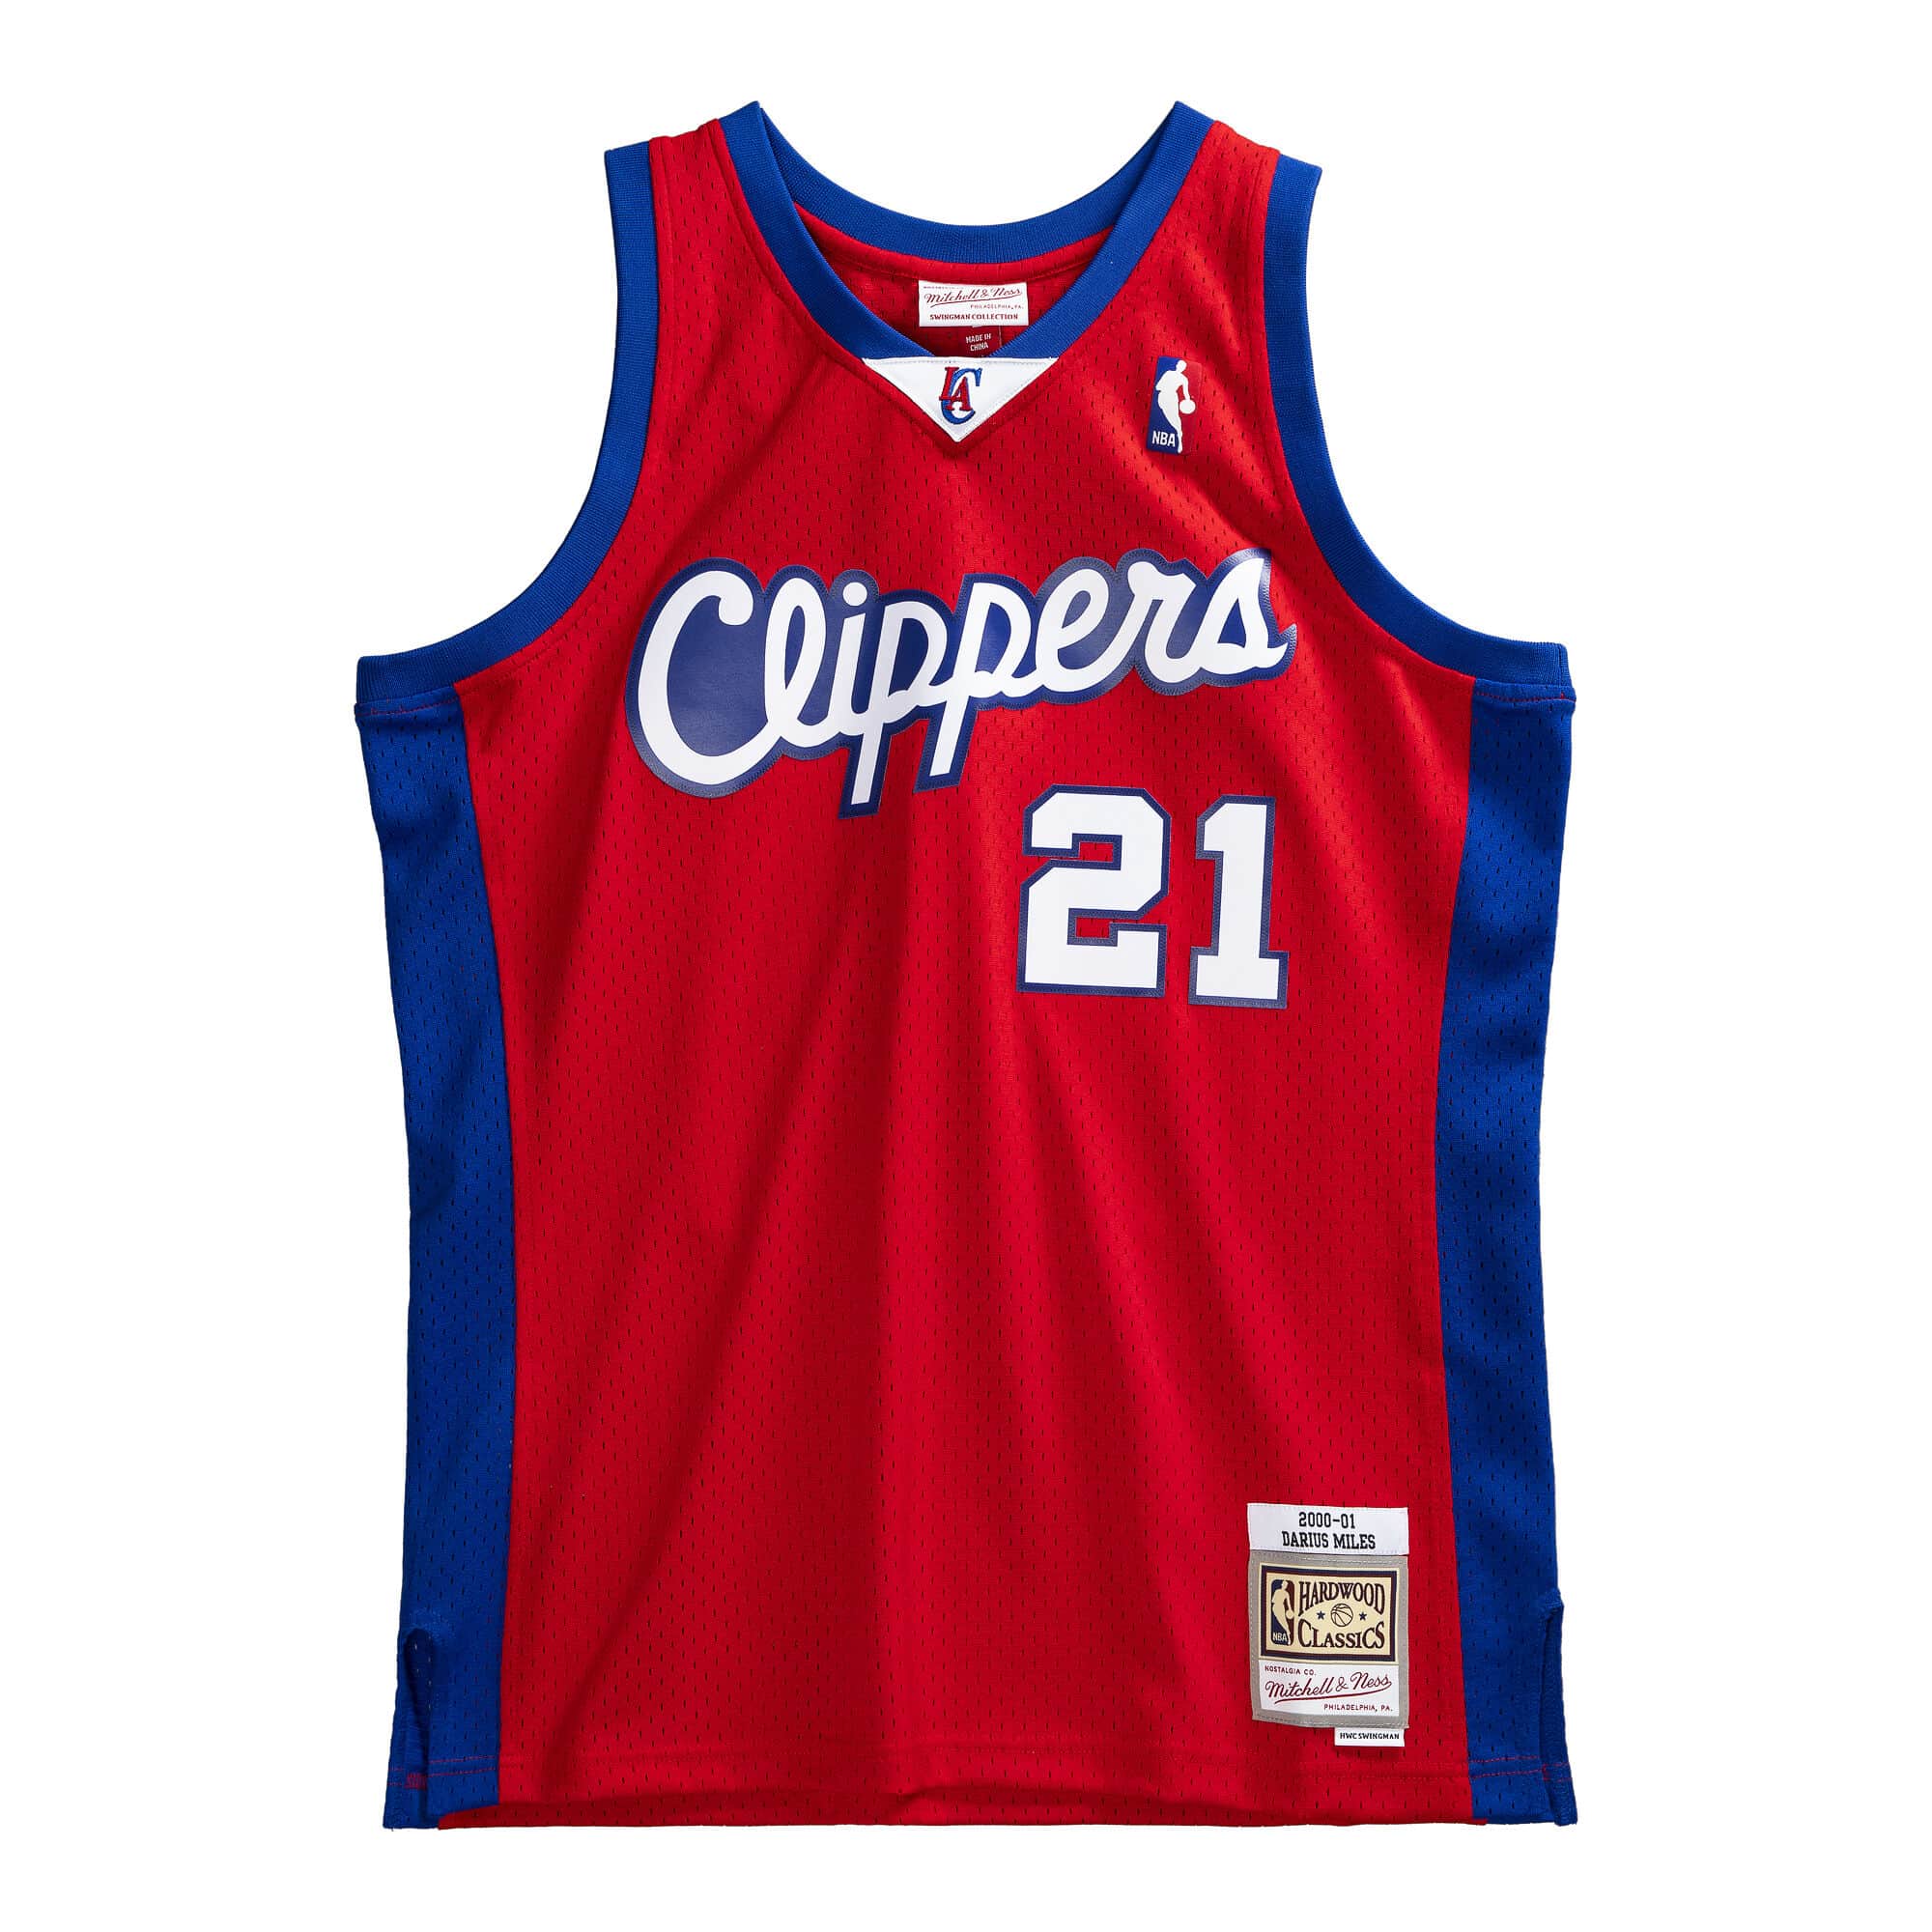 Ranking Clippers Jerseys (2000-2014) - Clips Nation